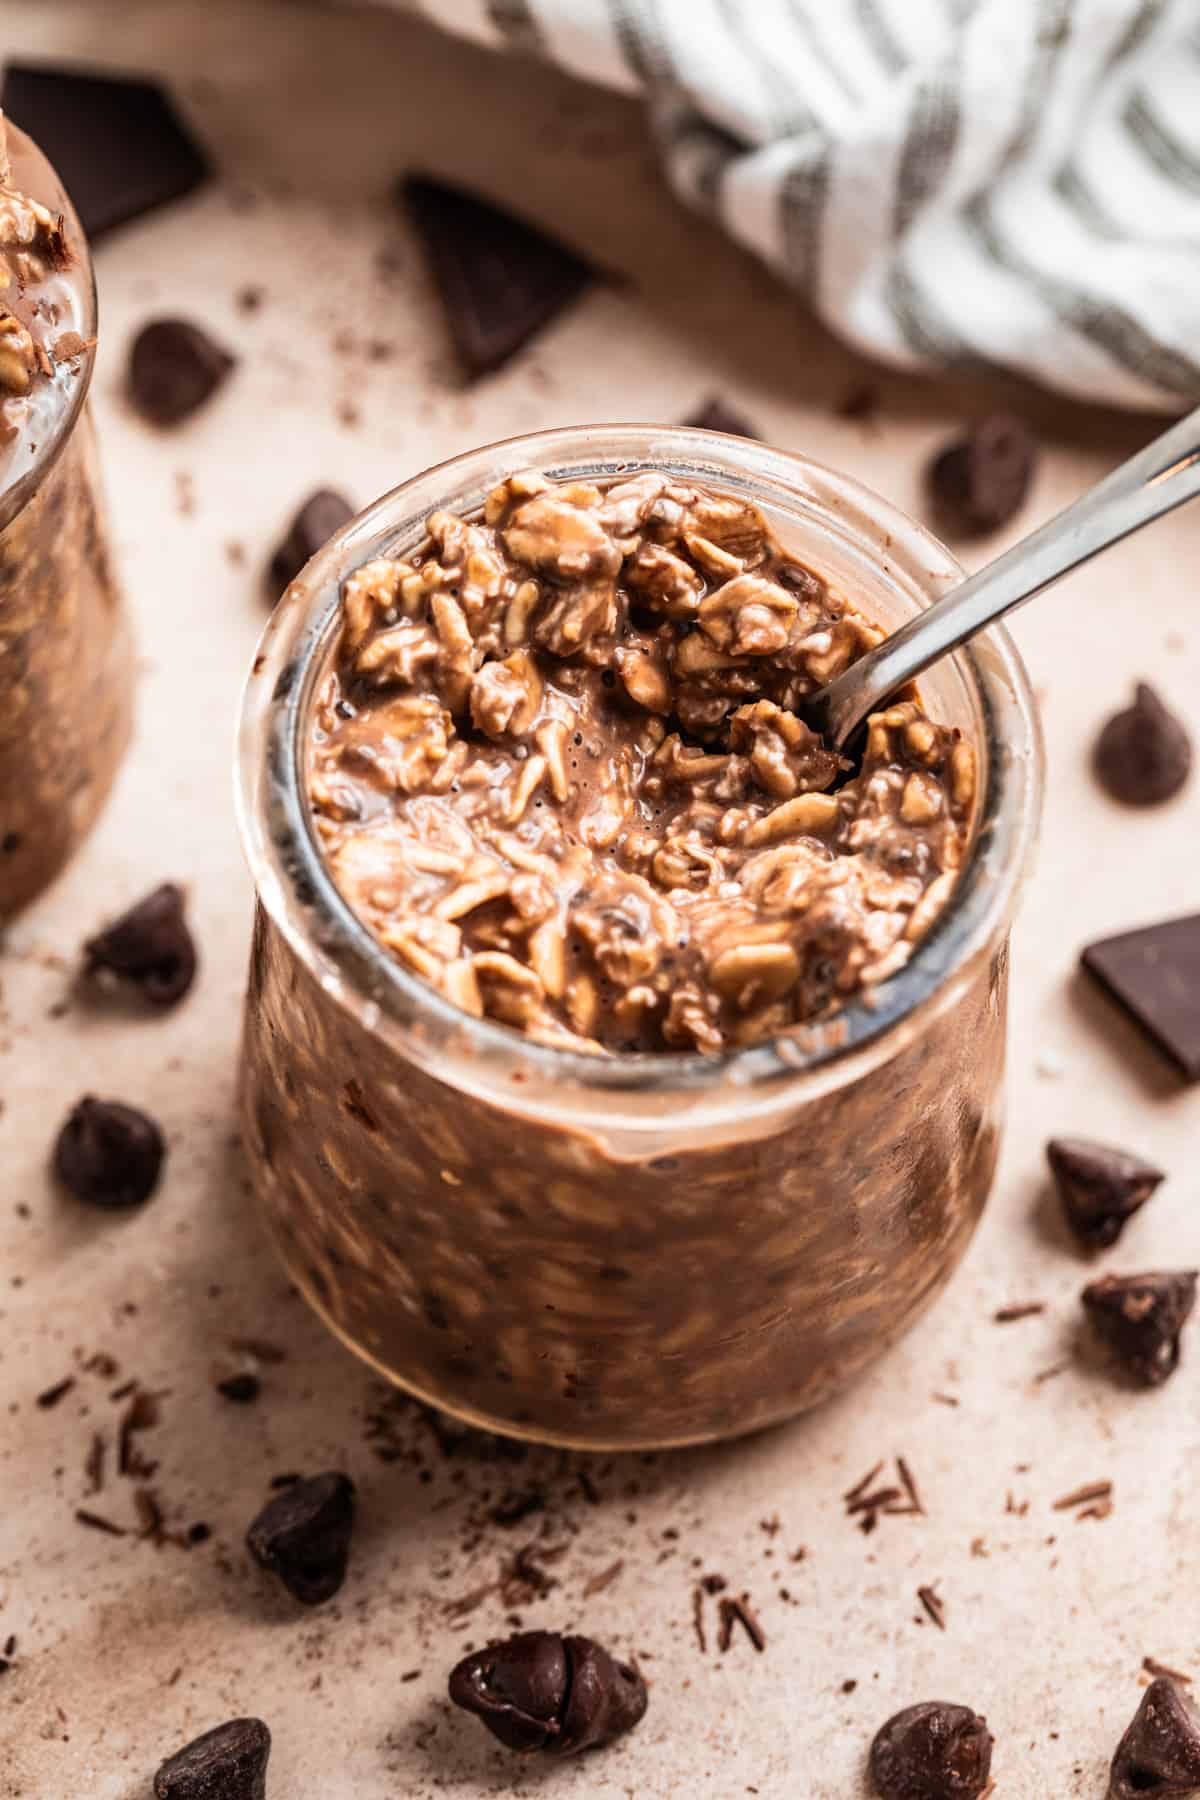 Spoon scooping into jar with chocolate overnight oats.